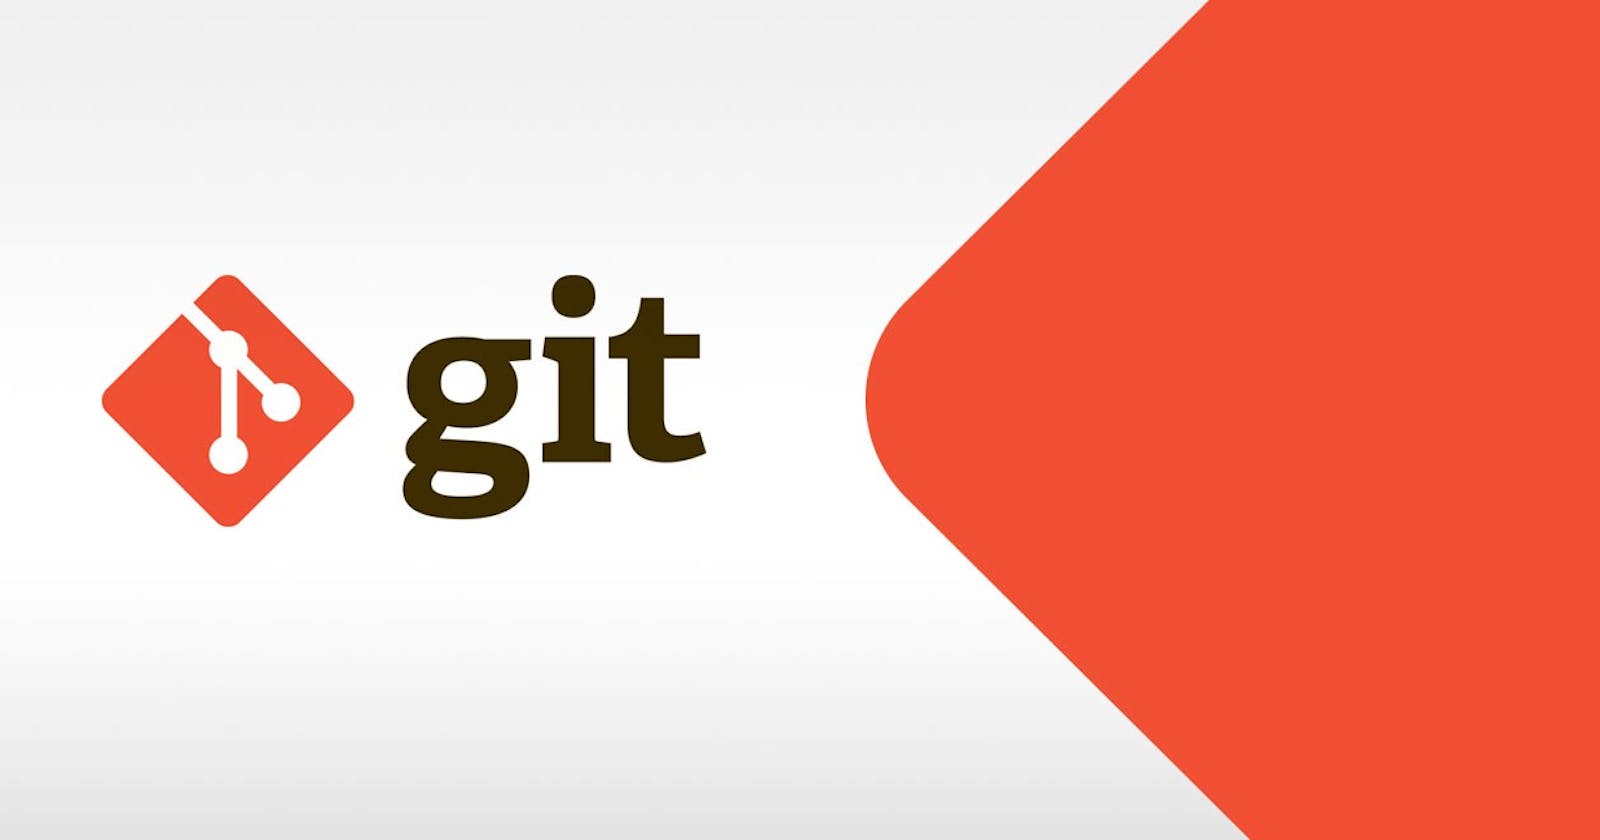 A Beginner's guide to version control using GIT